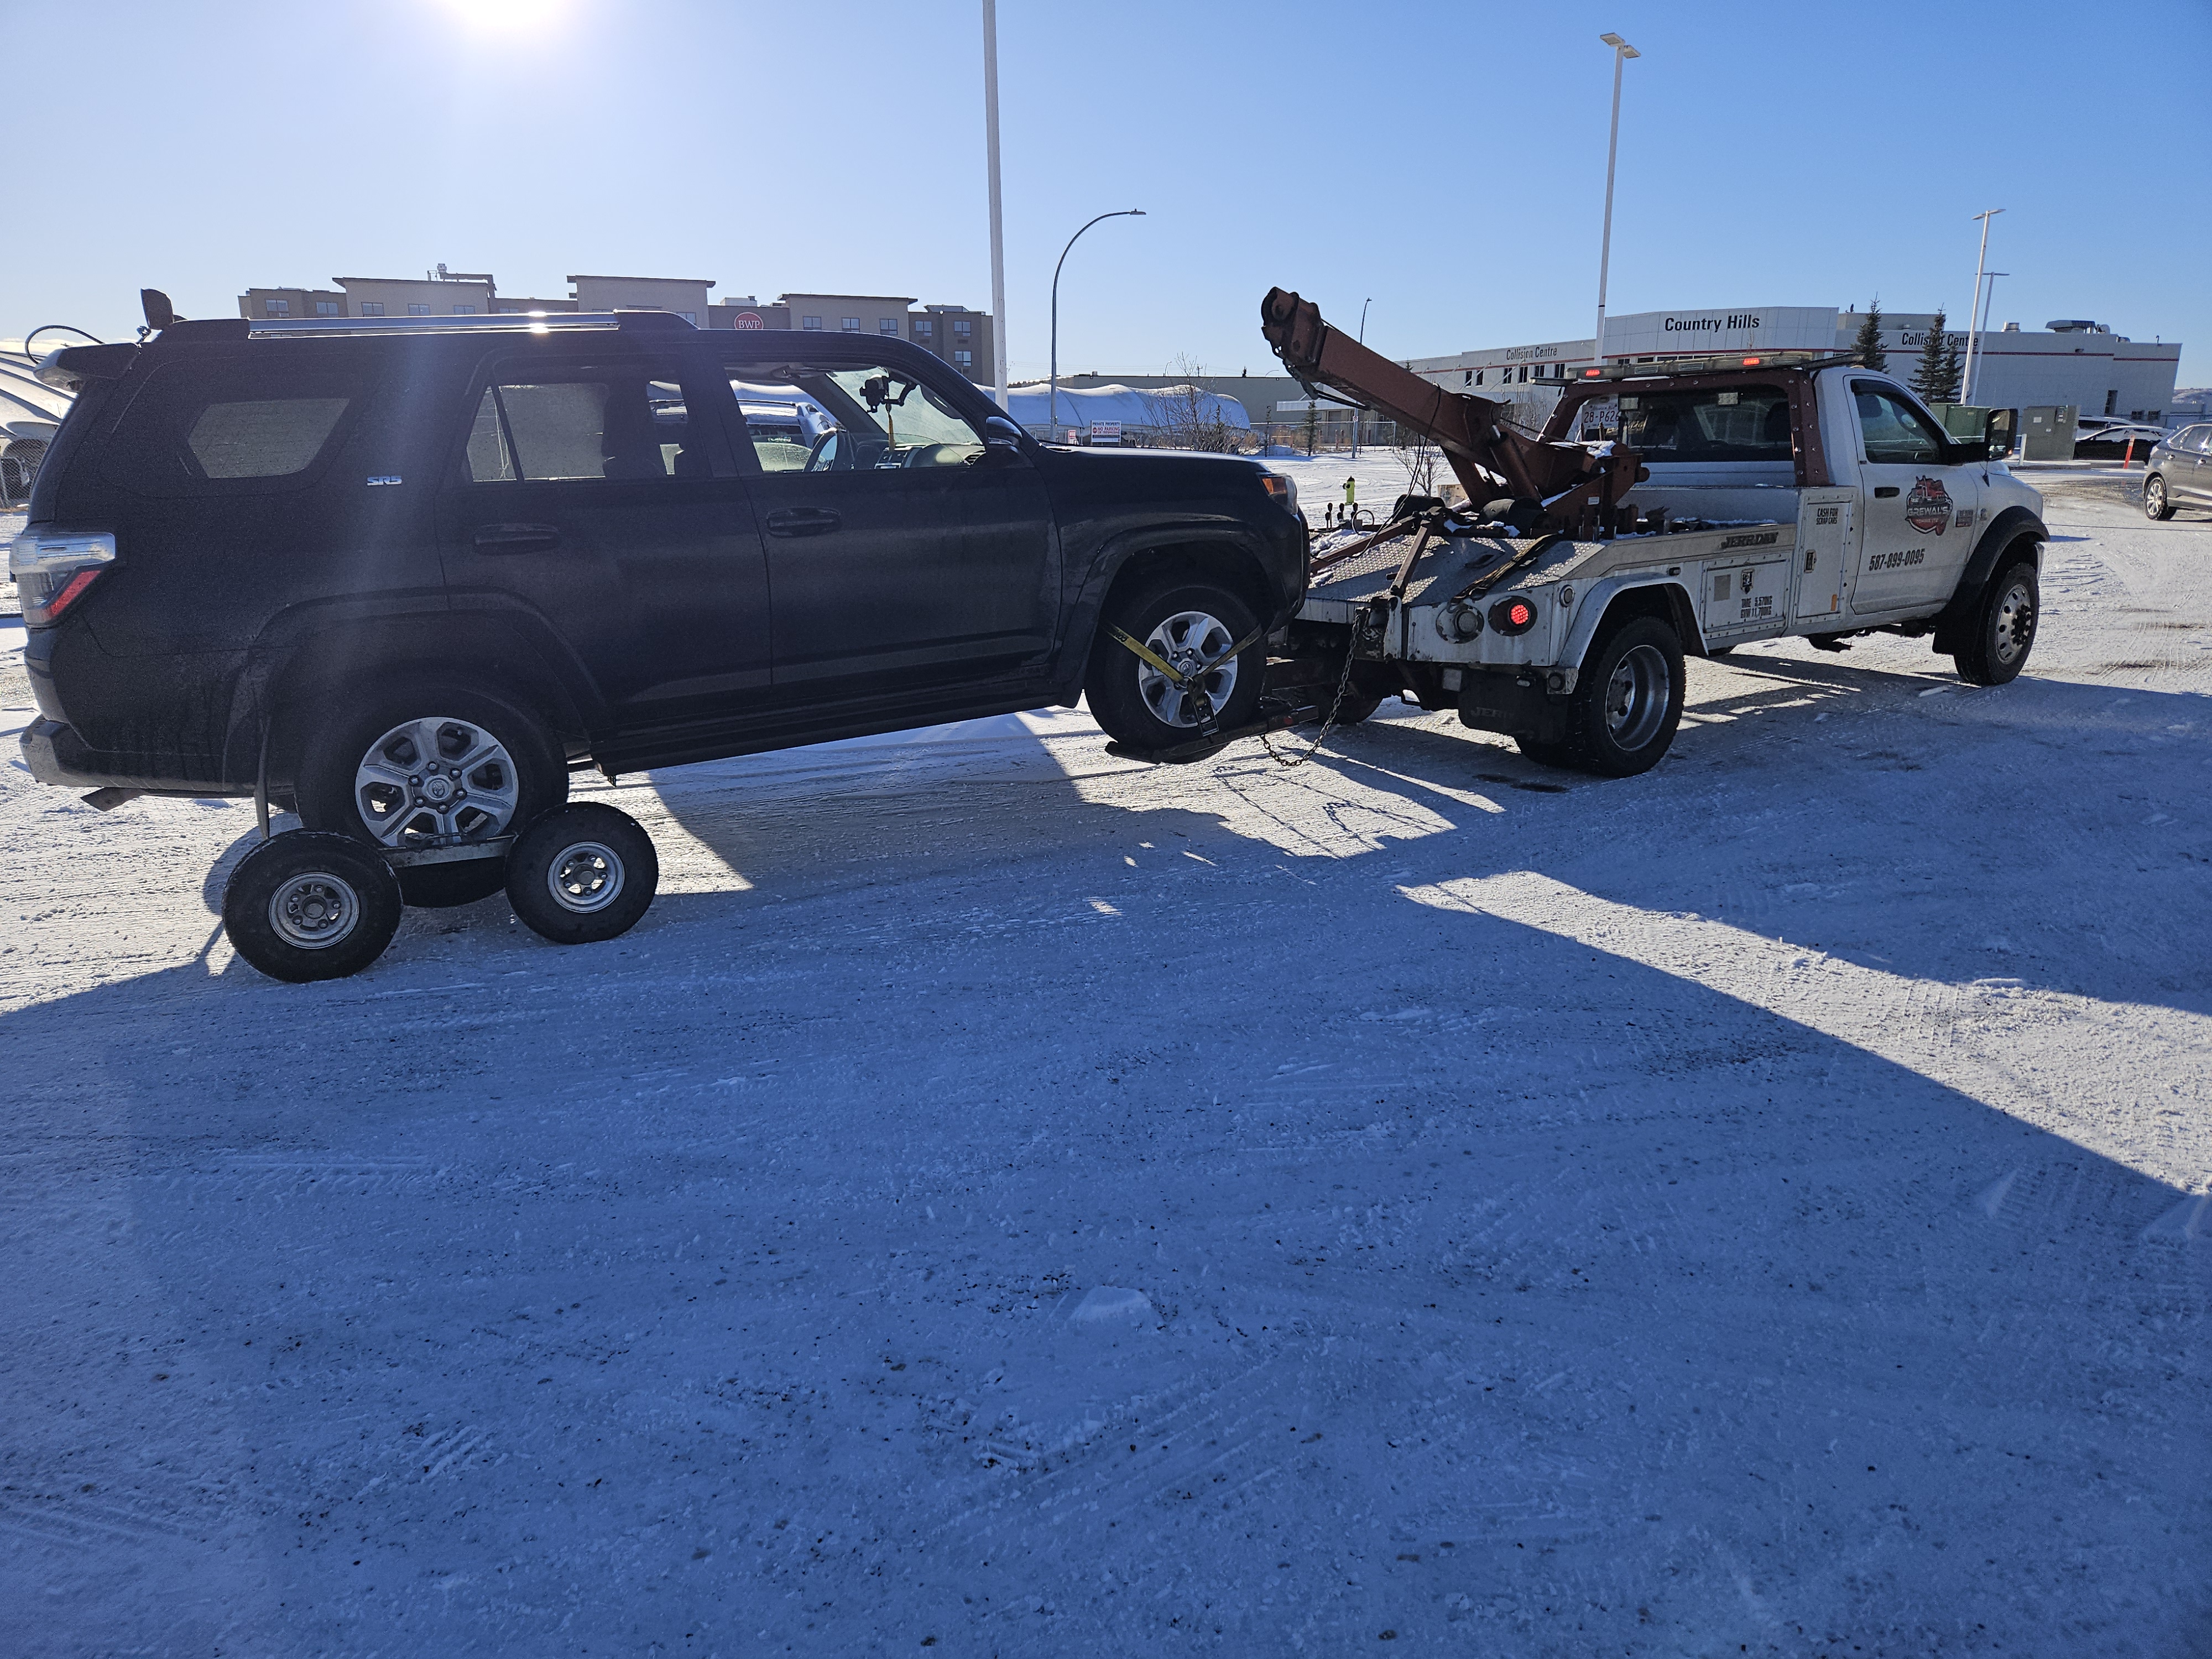 24 Hour Towing Assist